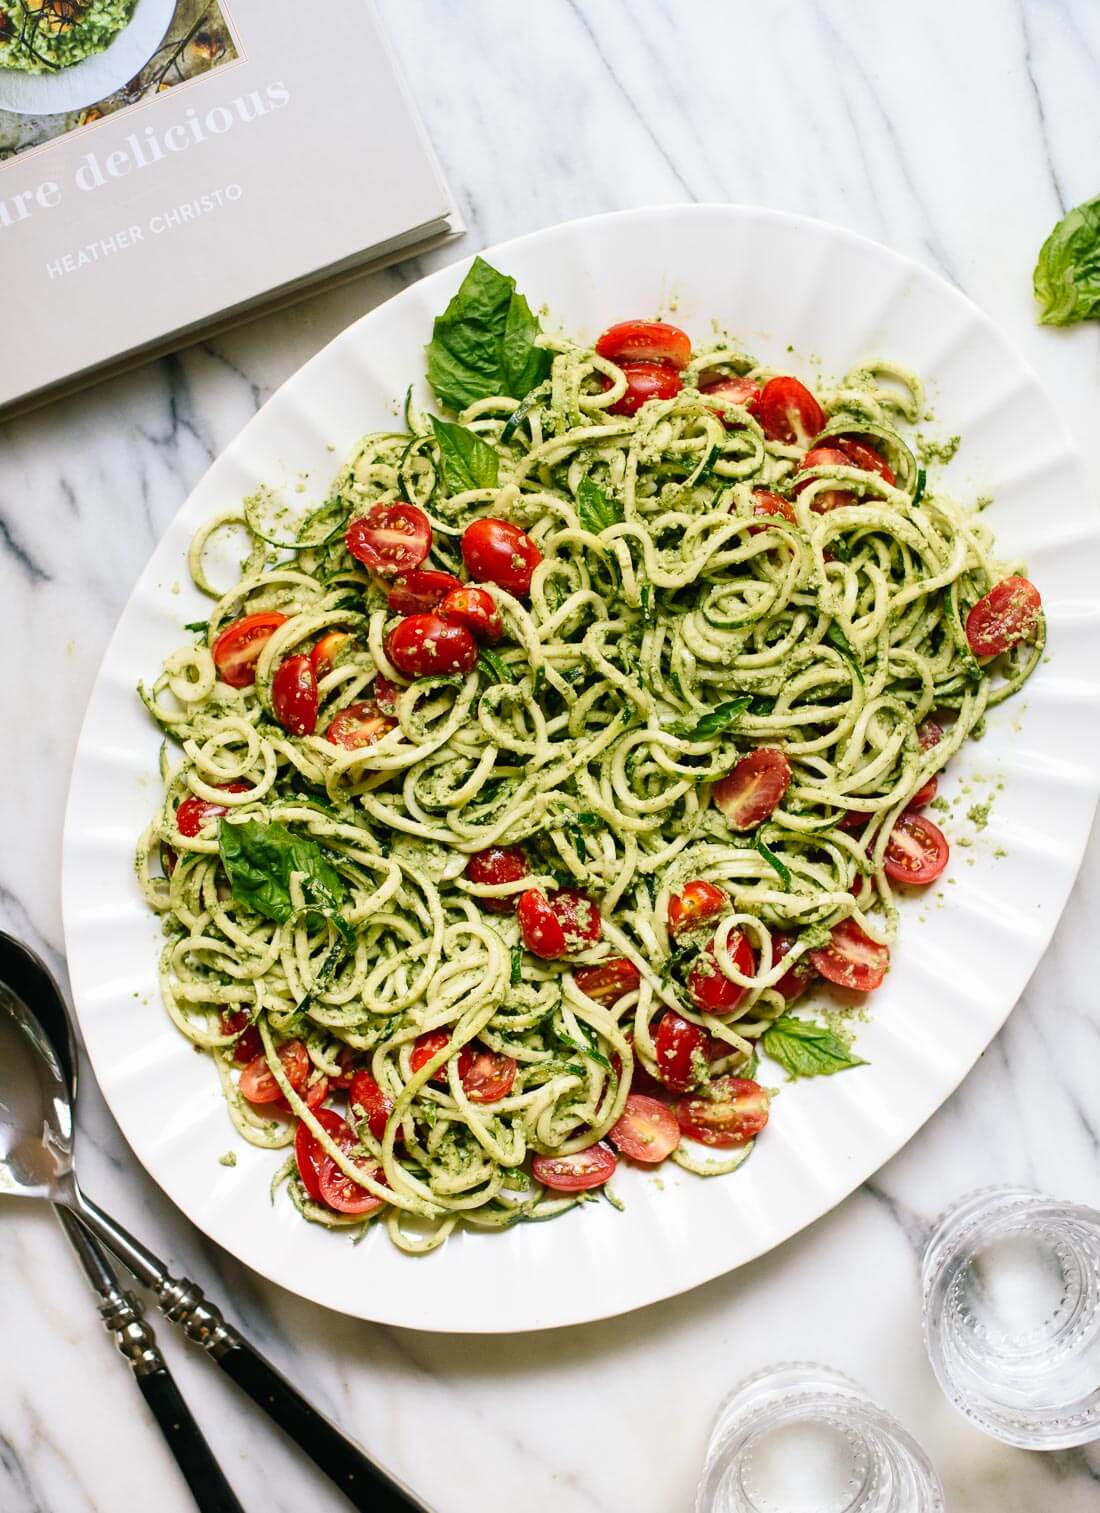 Fresh zucchini noodles with basil pesto and cherry tomatoes makes a light and healthy summer meal! cookieandkate.com